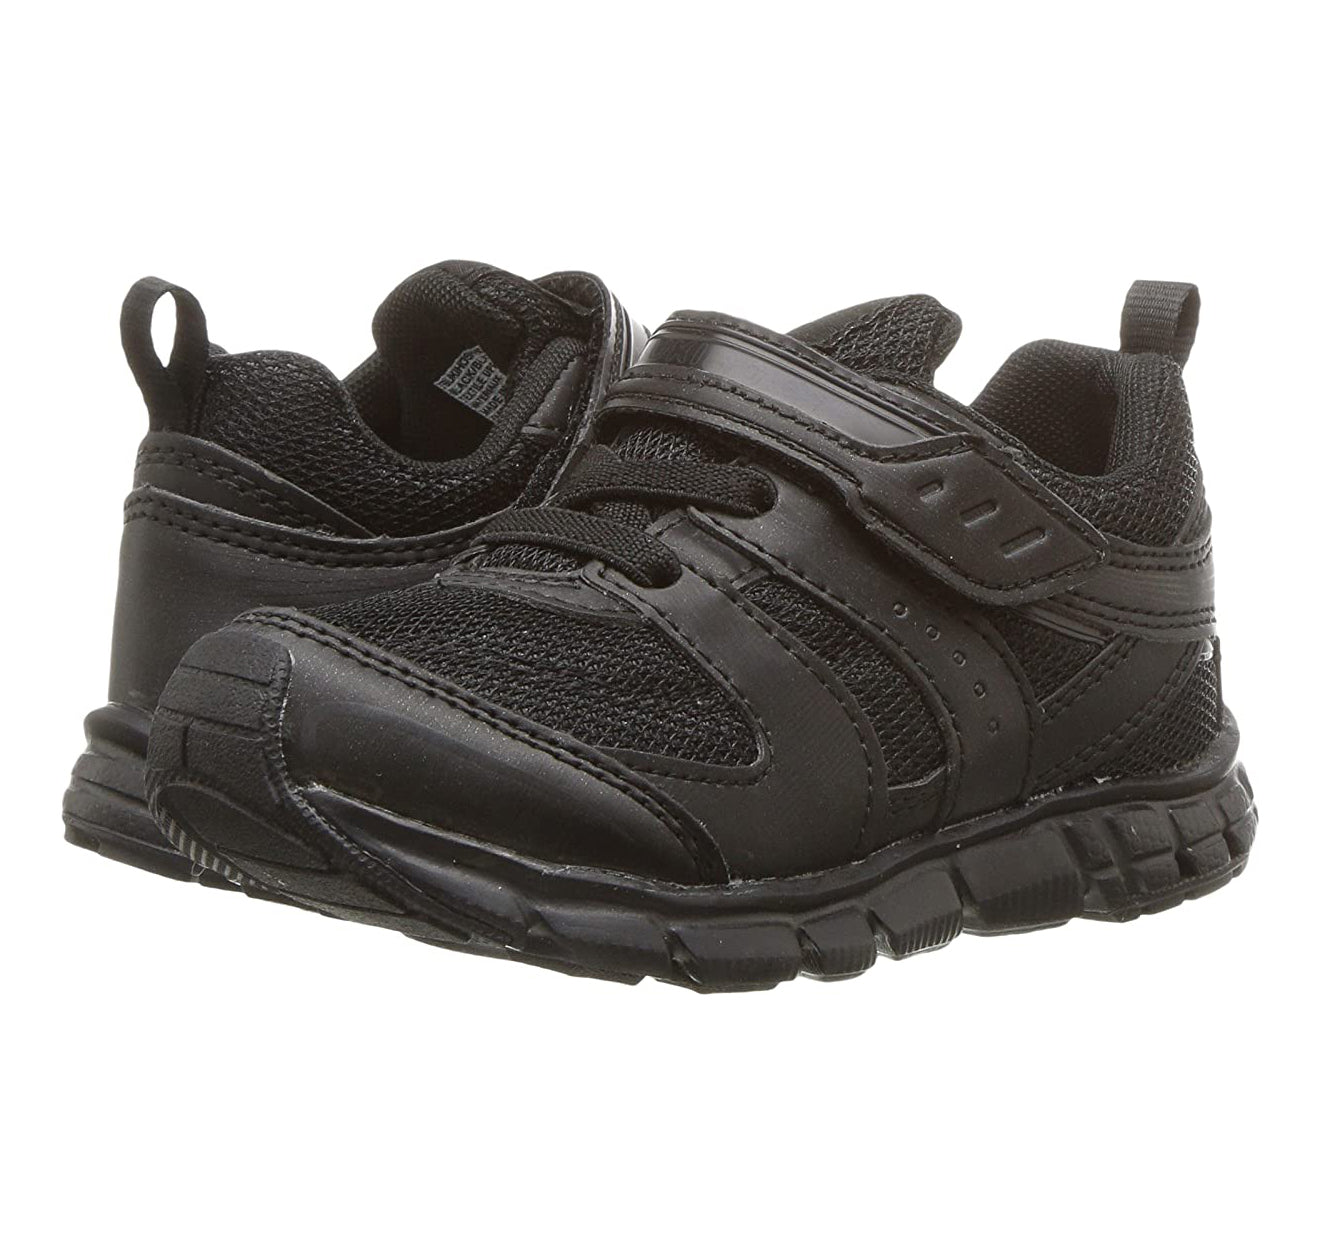 Child Tsukihoshi Velocity Sneaker in Black/Black from the front view